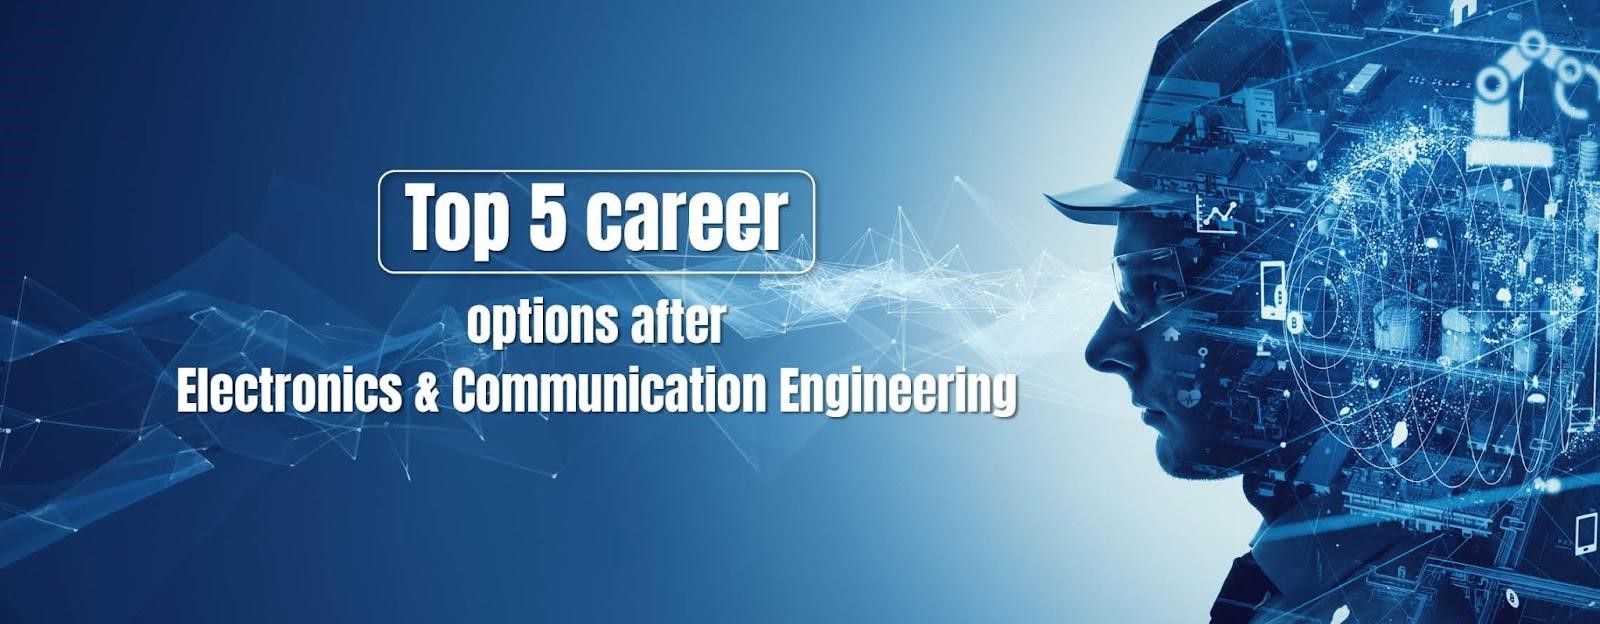 Top Career Option After Electronics & Communication Engineering